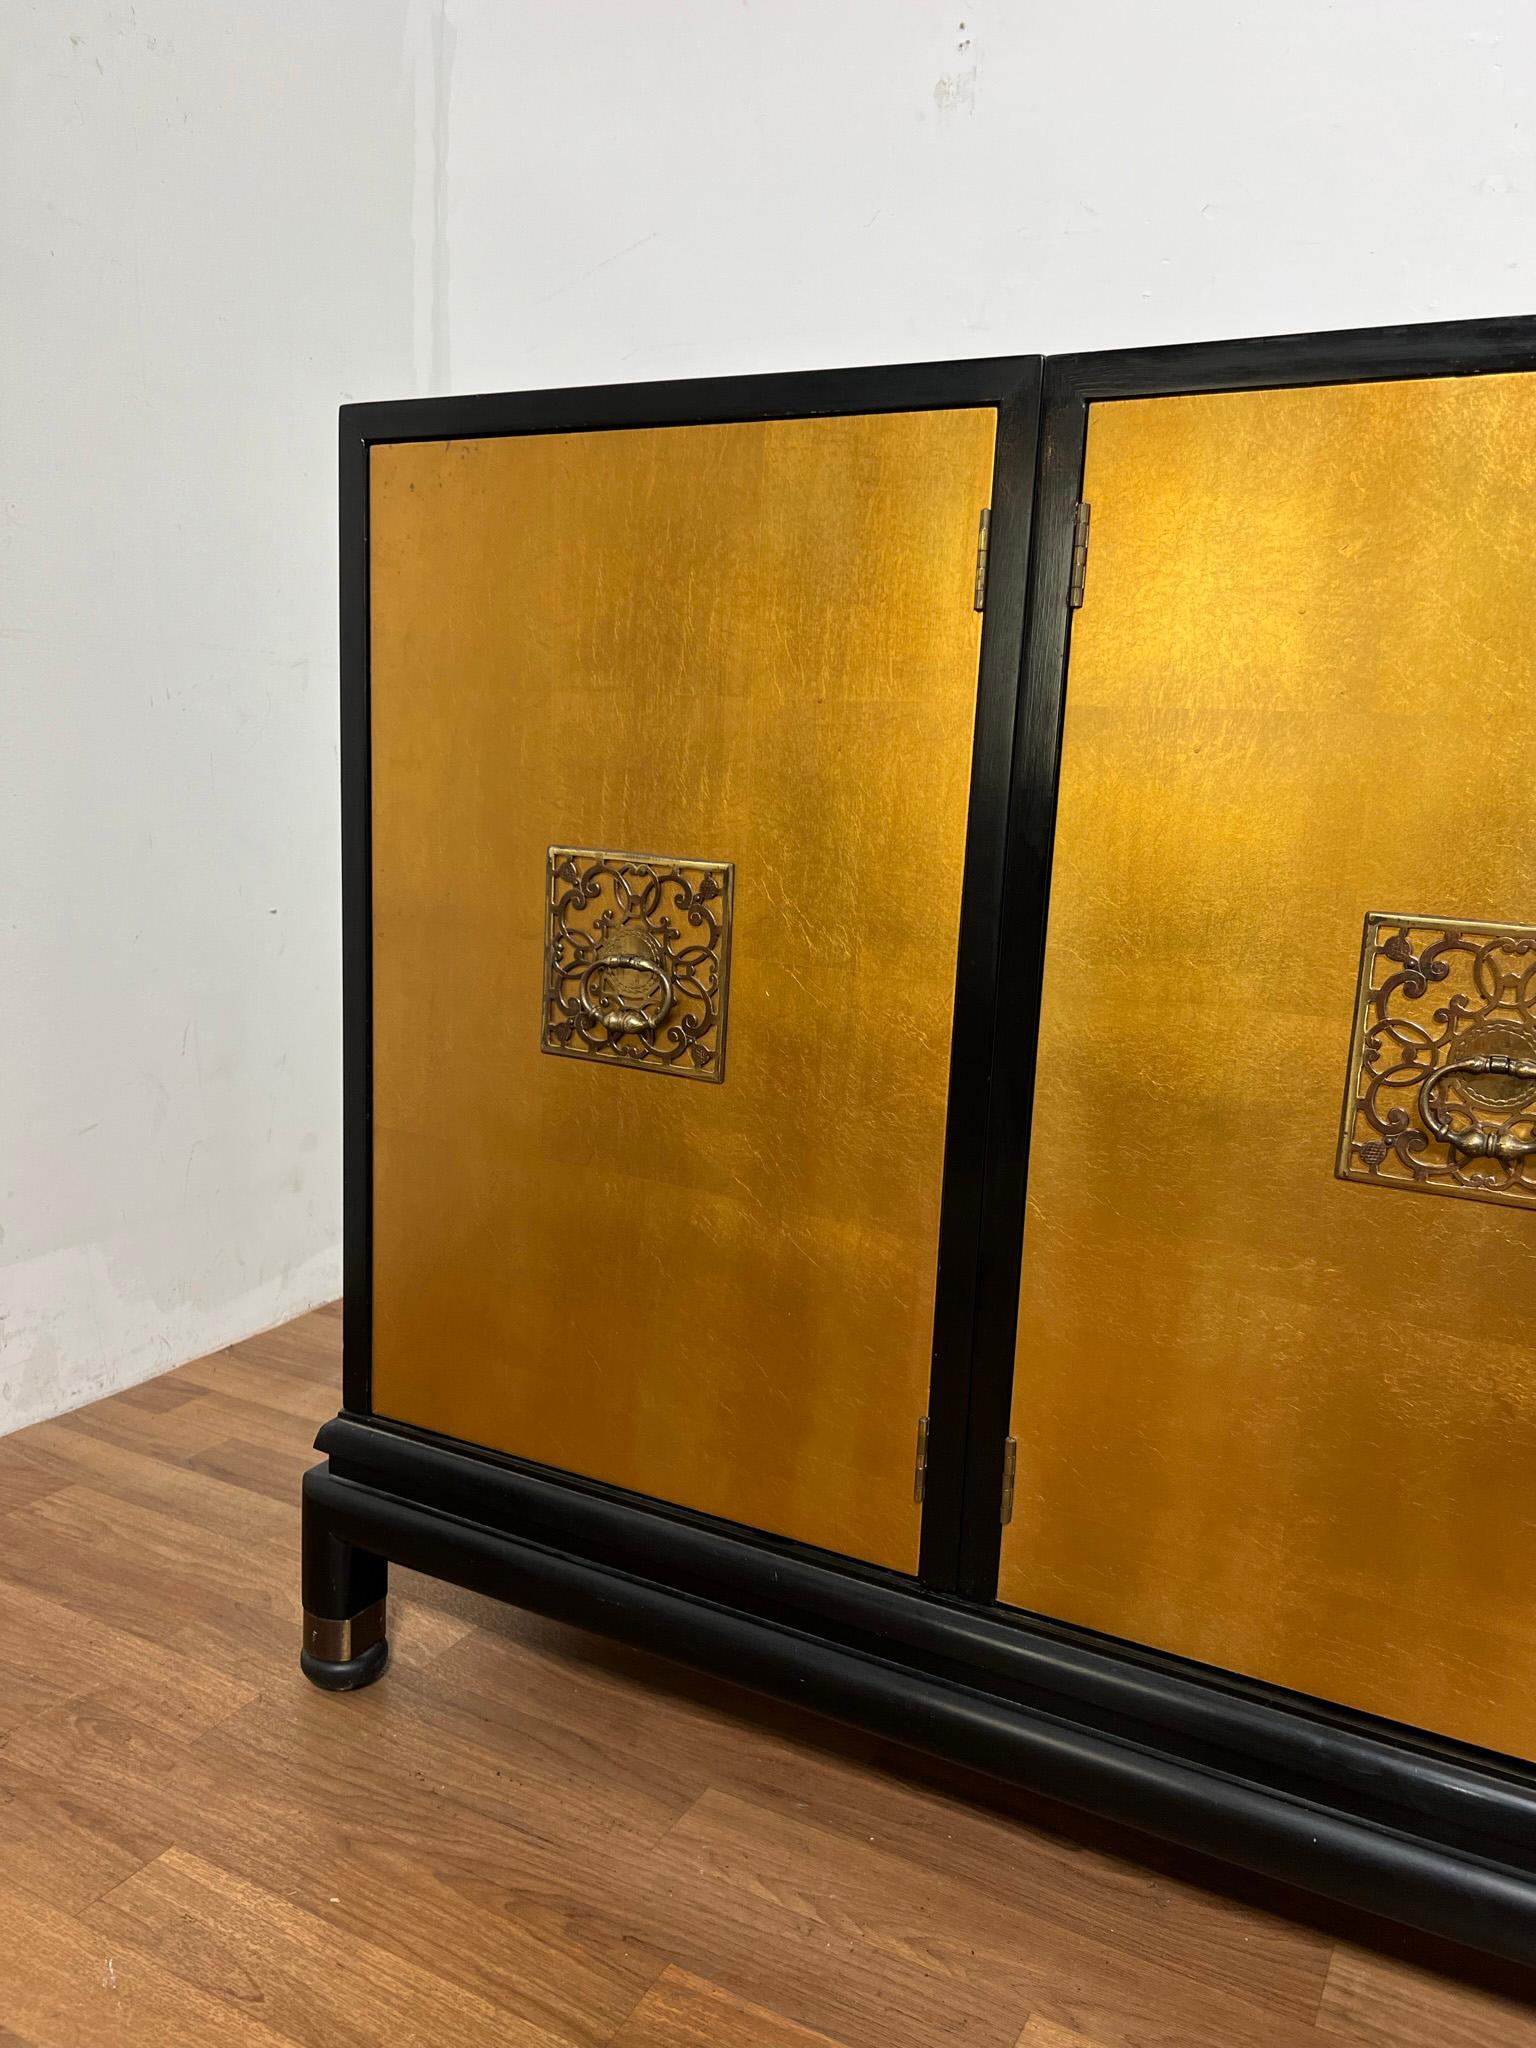 Renzo Rutili for Johnson Furniture Company credenza consisting of four chests with gold leaf door fronts and lacquered cases, resting on a platform bench. The smaller chests on either end each feature an adjustable shelf. One of the larger chests